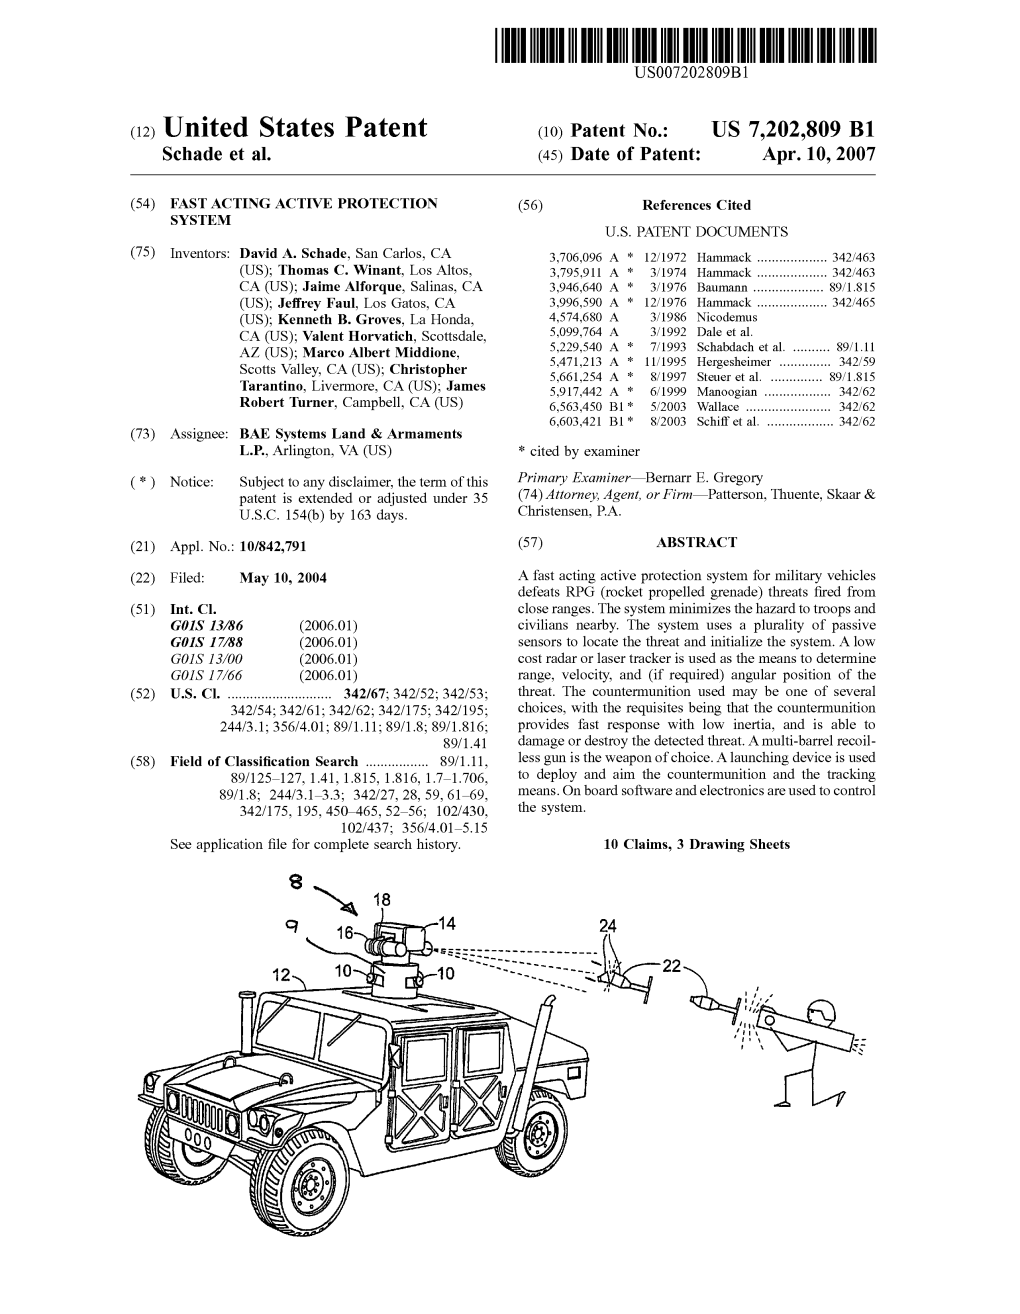 (12) United States Patent (10) Patent N0.: US 7,202,809 B1 Schade Et A]